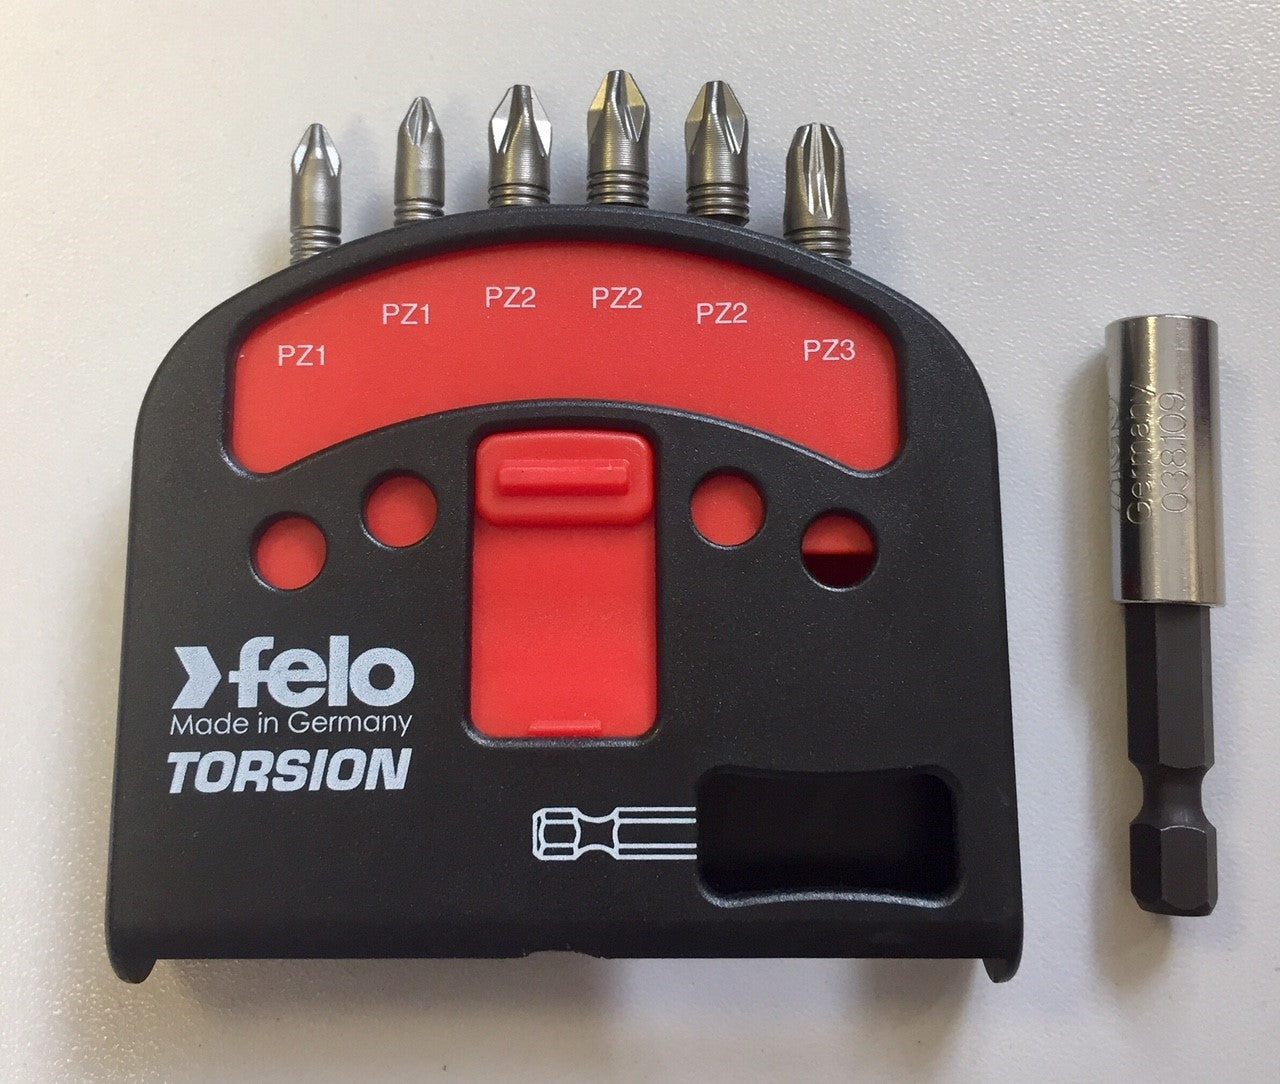 FELO torsion screwdriver bit kit with magnetic holder - for use with impact drivers